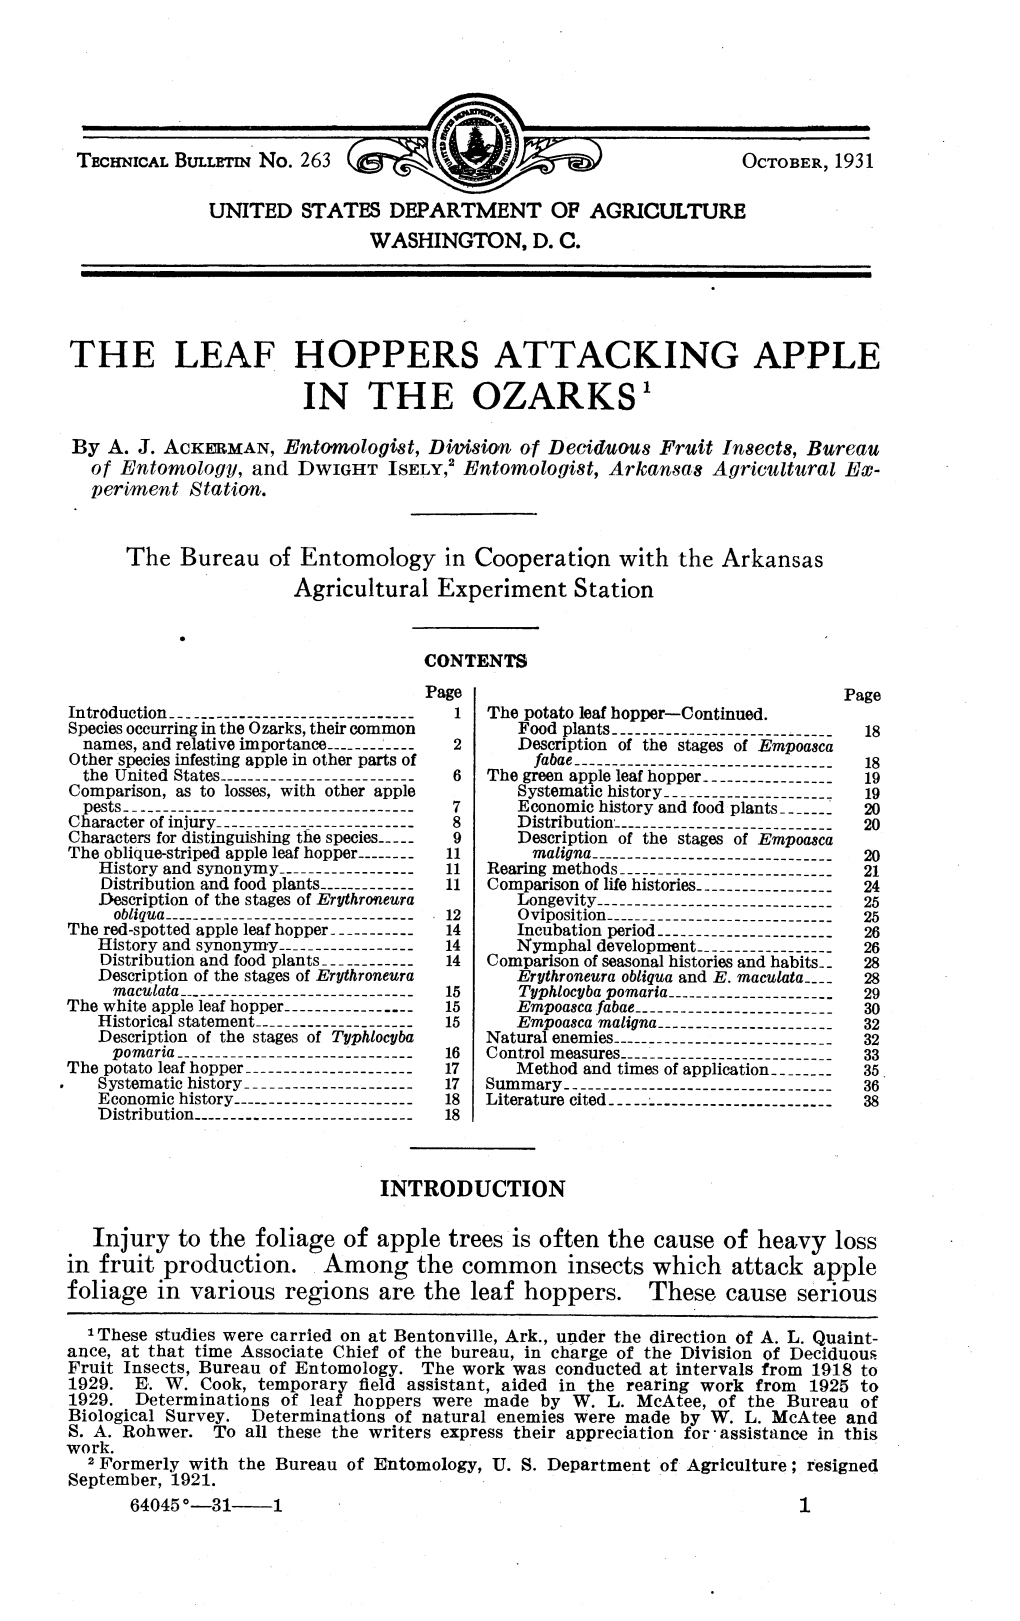 THE LEAF HOPPERS ATTACKING APPLE in the OZARKS^ by A